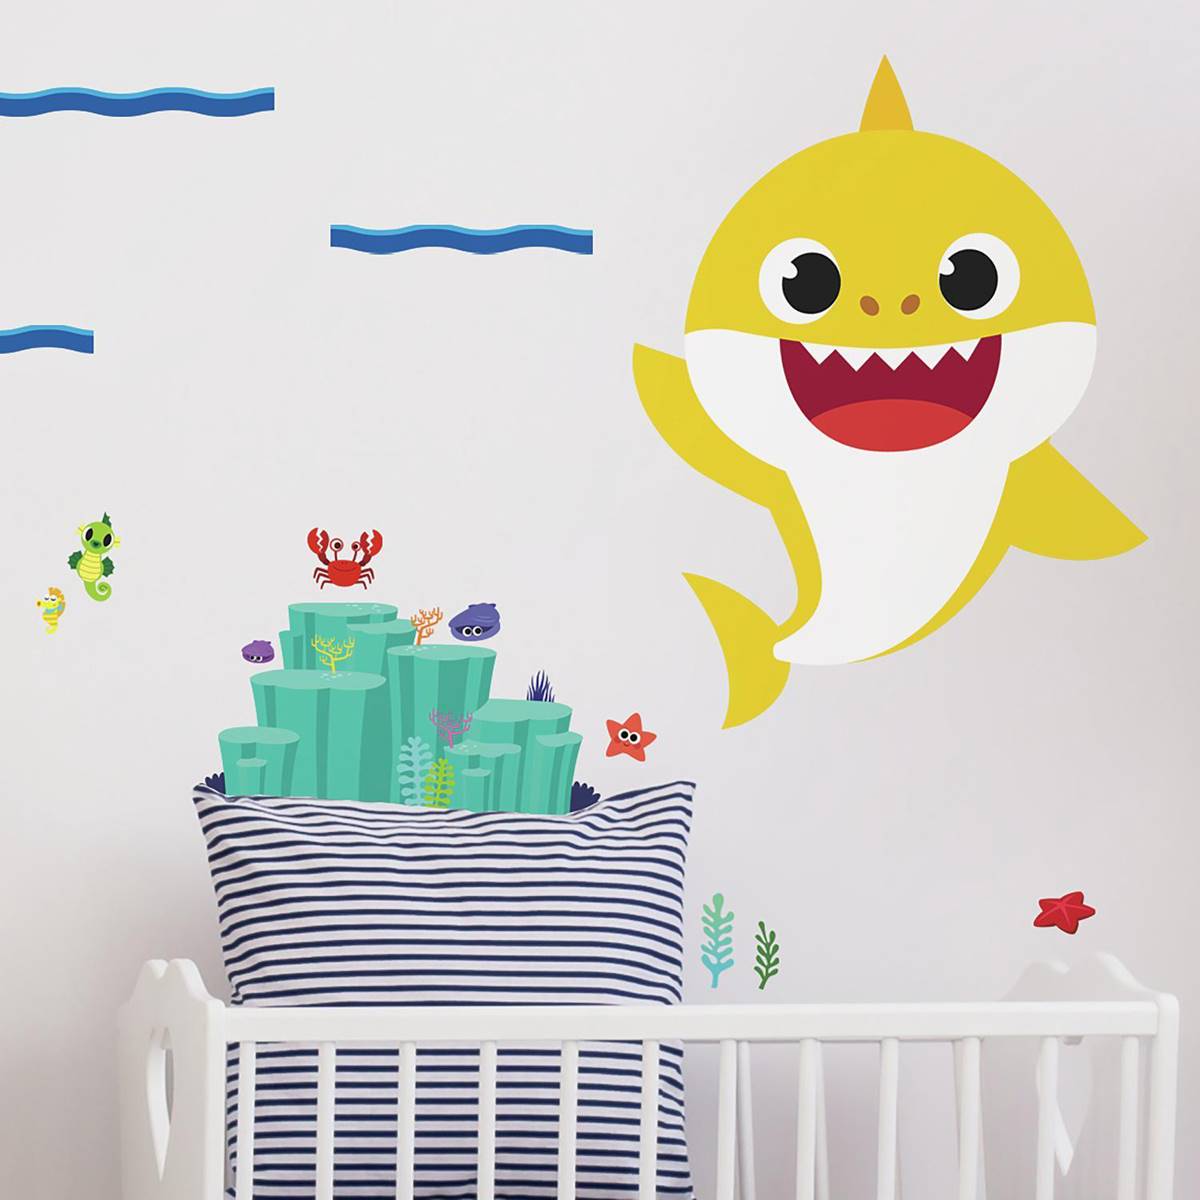 RoomMates(R) Baby Shark Peel & Stick Giant Wall Decal Set